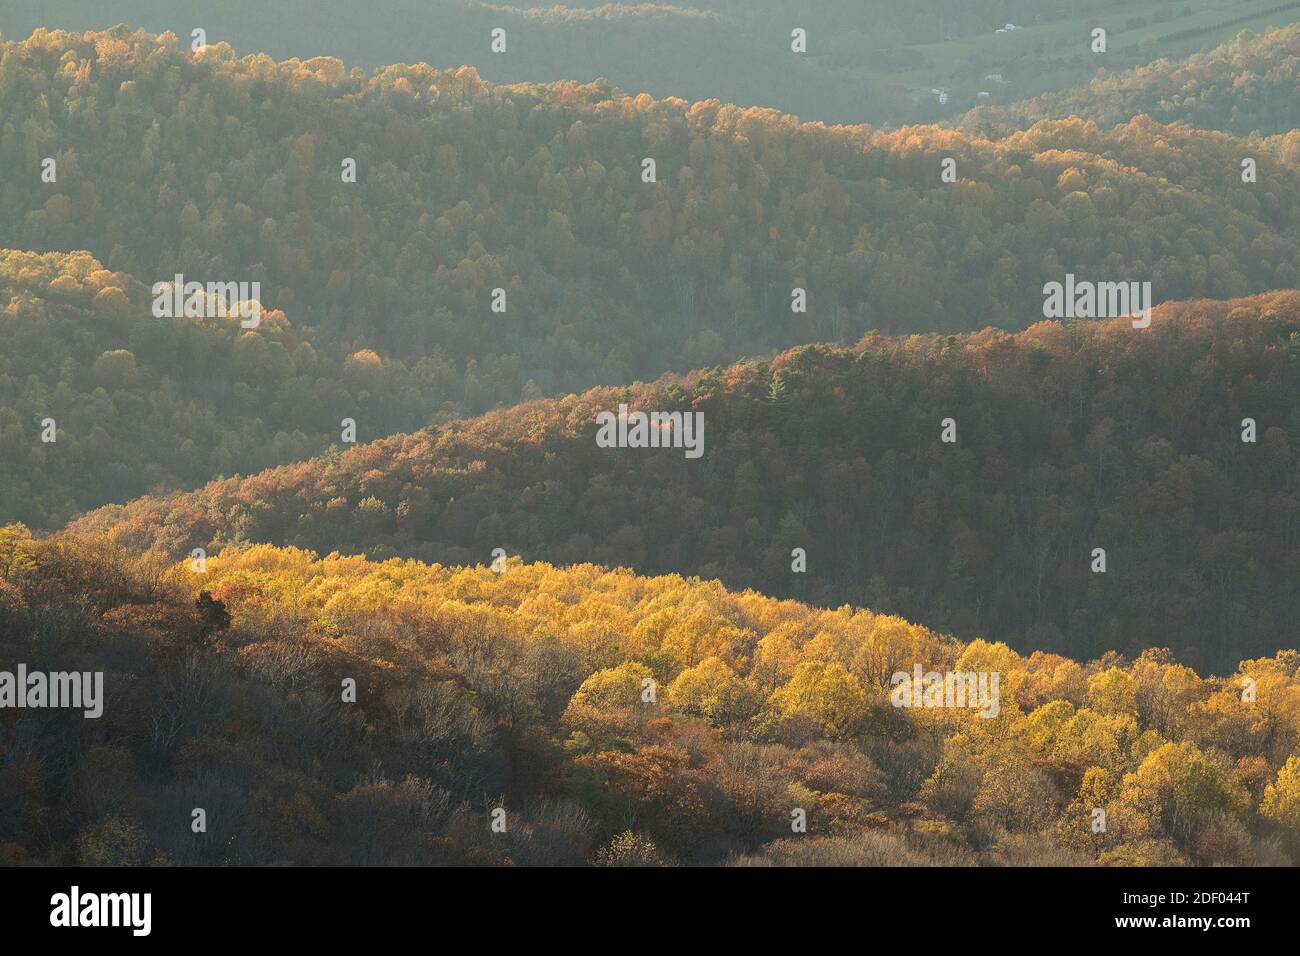 Fall foliage blankets the forests in the Shenandoah National Park and Shenandoah Valley in Virginia. Stock Photo